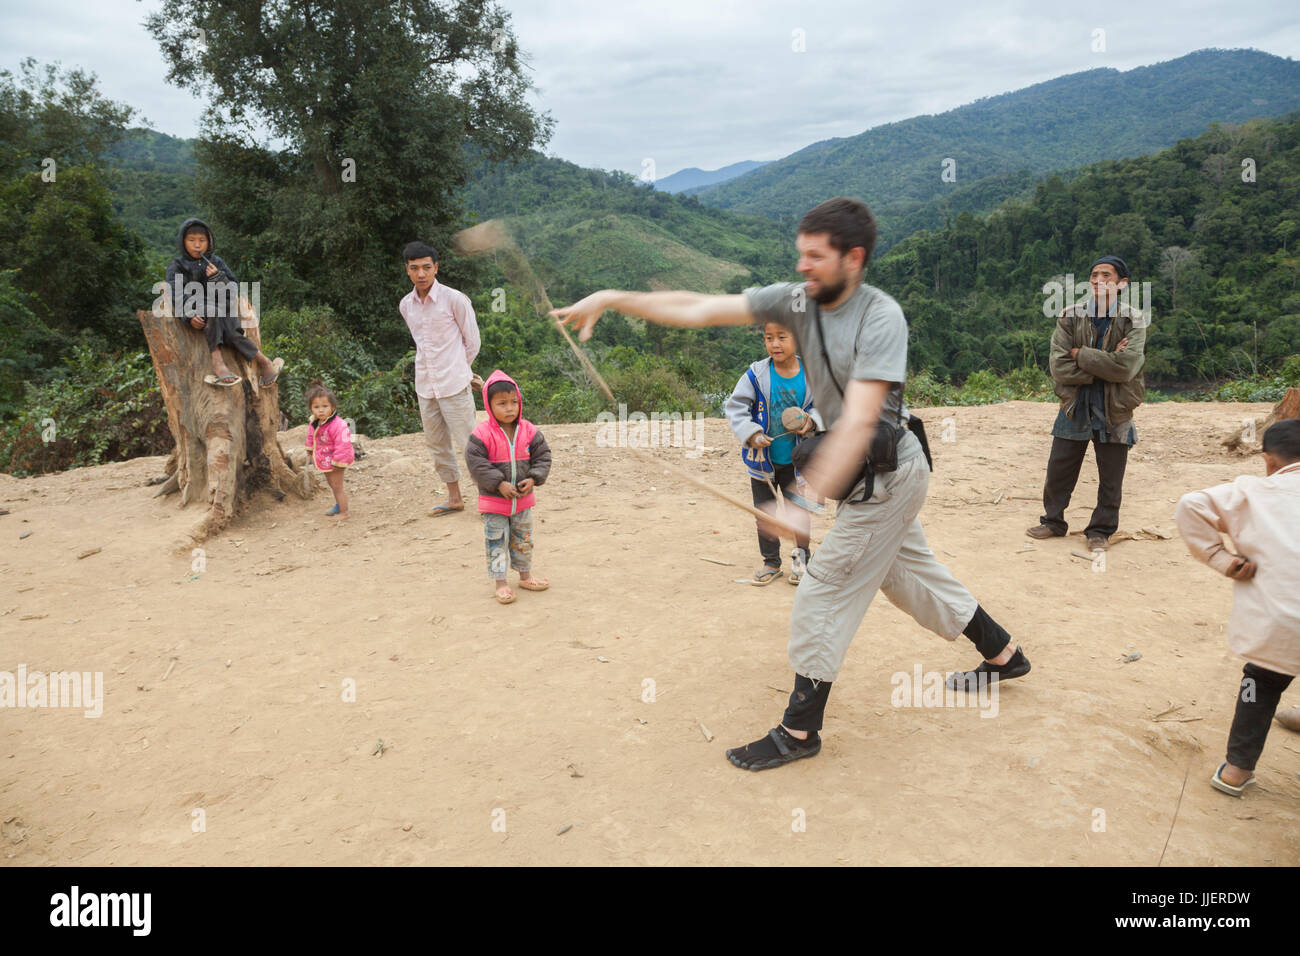 Robert Hahn tries (unsuccessfully) to throw a wooden spinning top with instructions from the children at Ban Sop Kha, Laos. Stock Photo